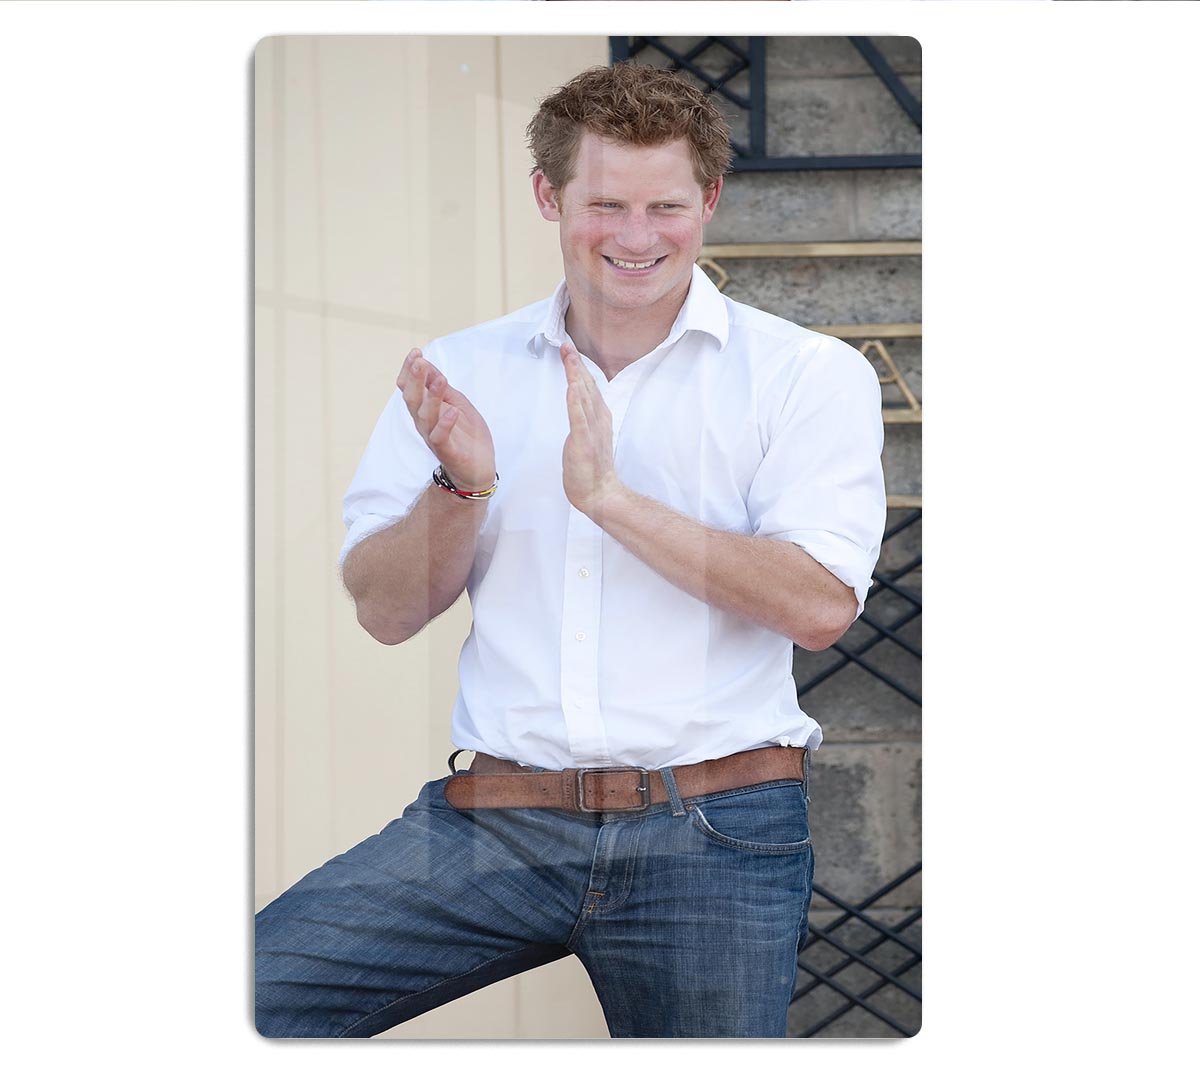 Prince Harry at a blind clinic in Lesotho South Africa HD Metal Print